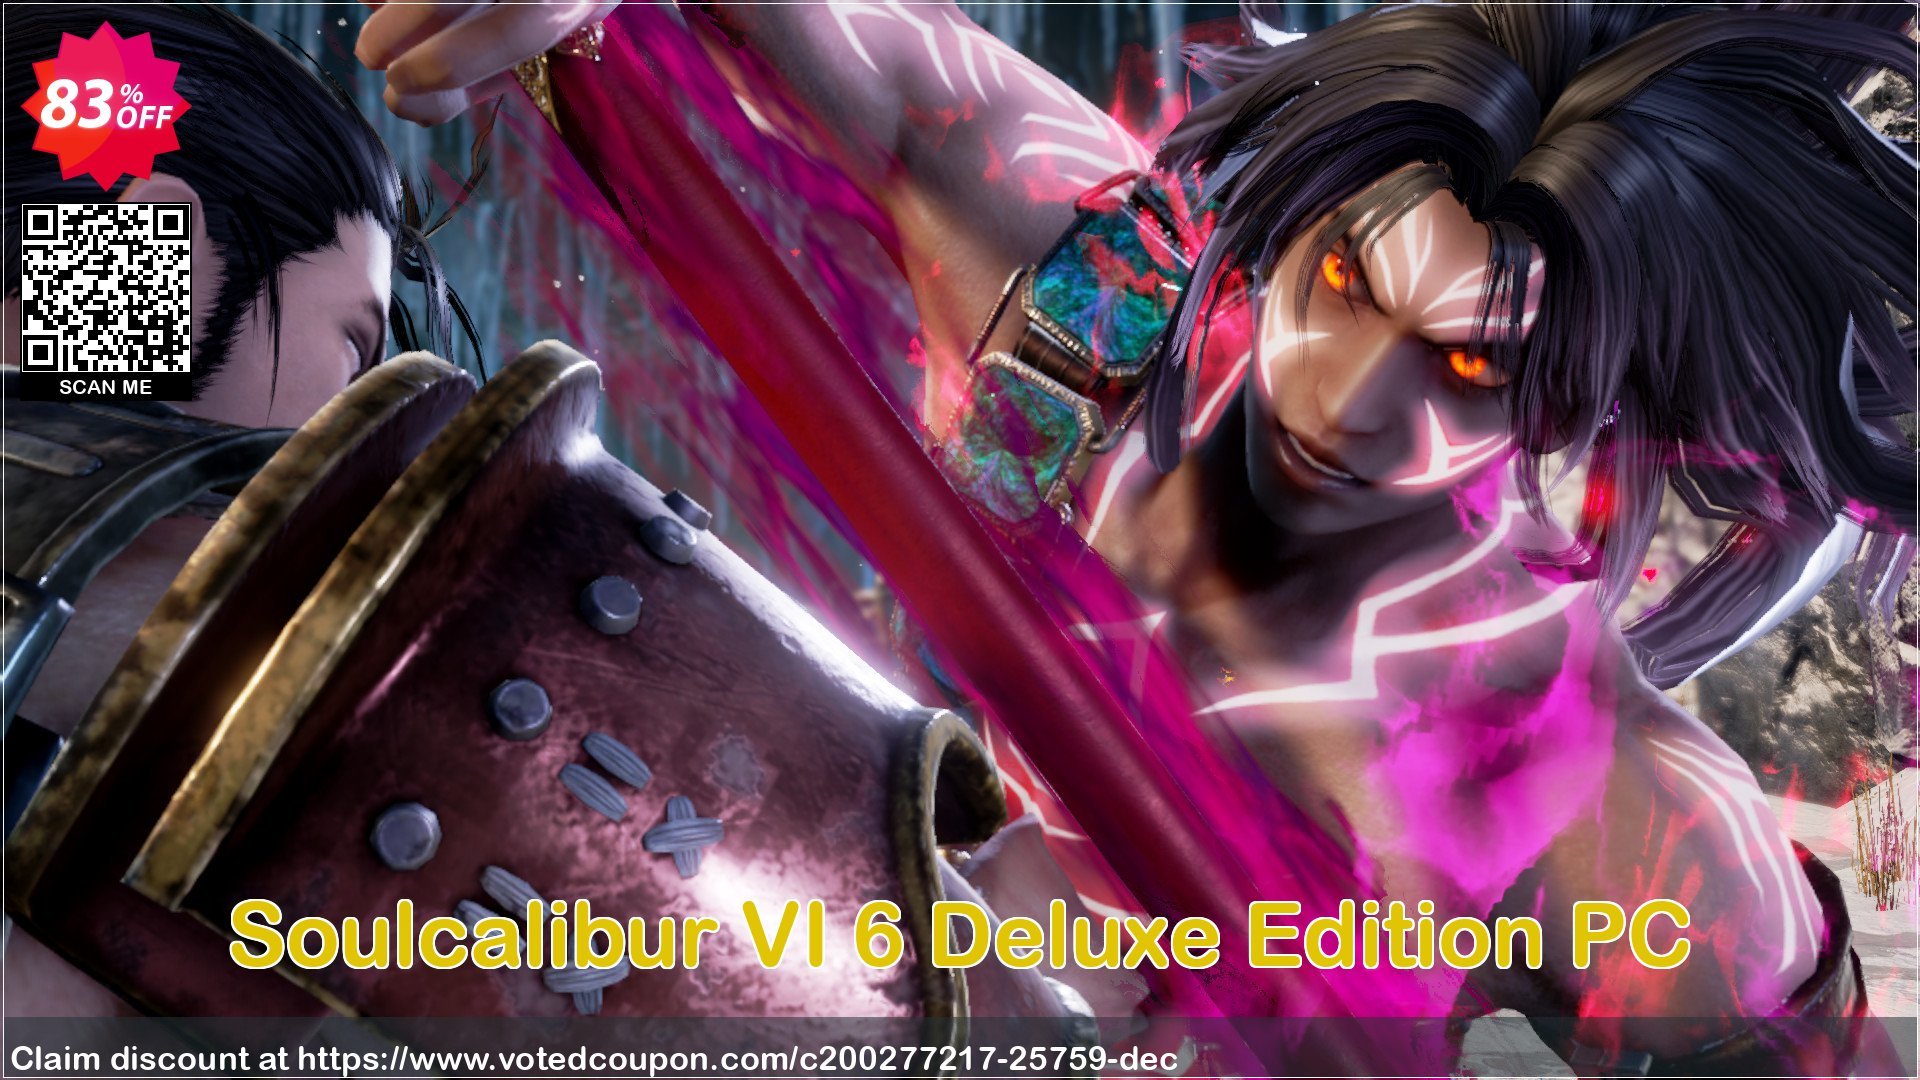 Soulcalibur VI 6 Deluxe Edition PC Coupon Code May 2024, 83% OFF - VotedCoupon